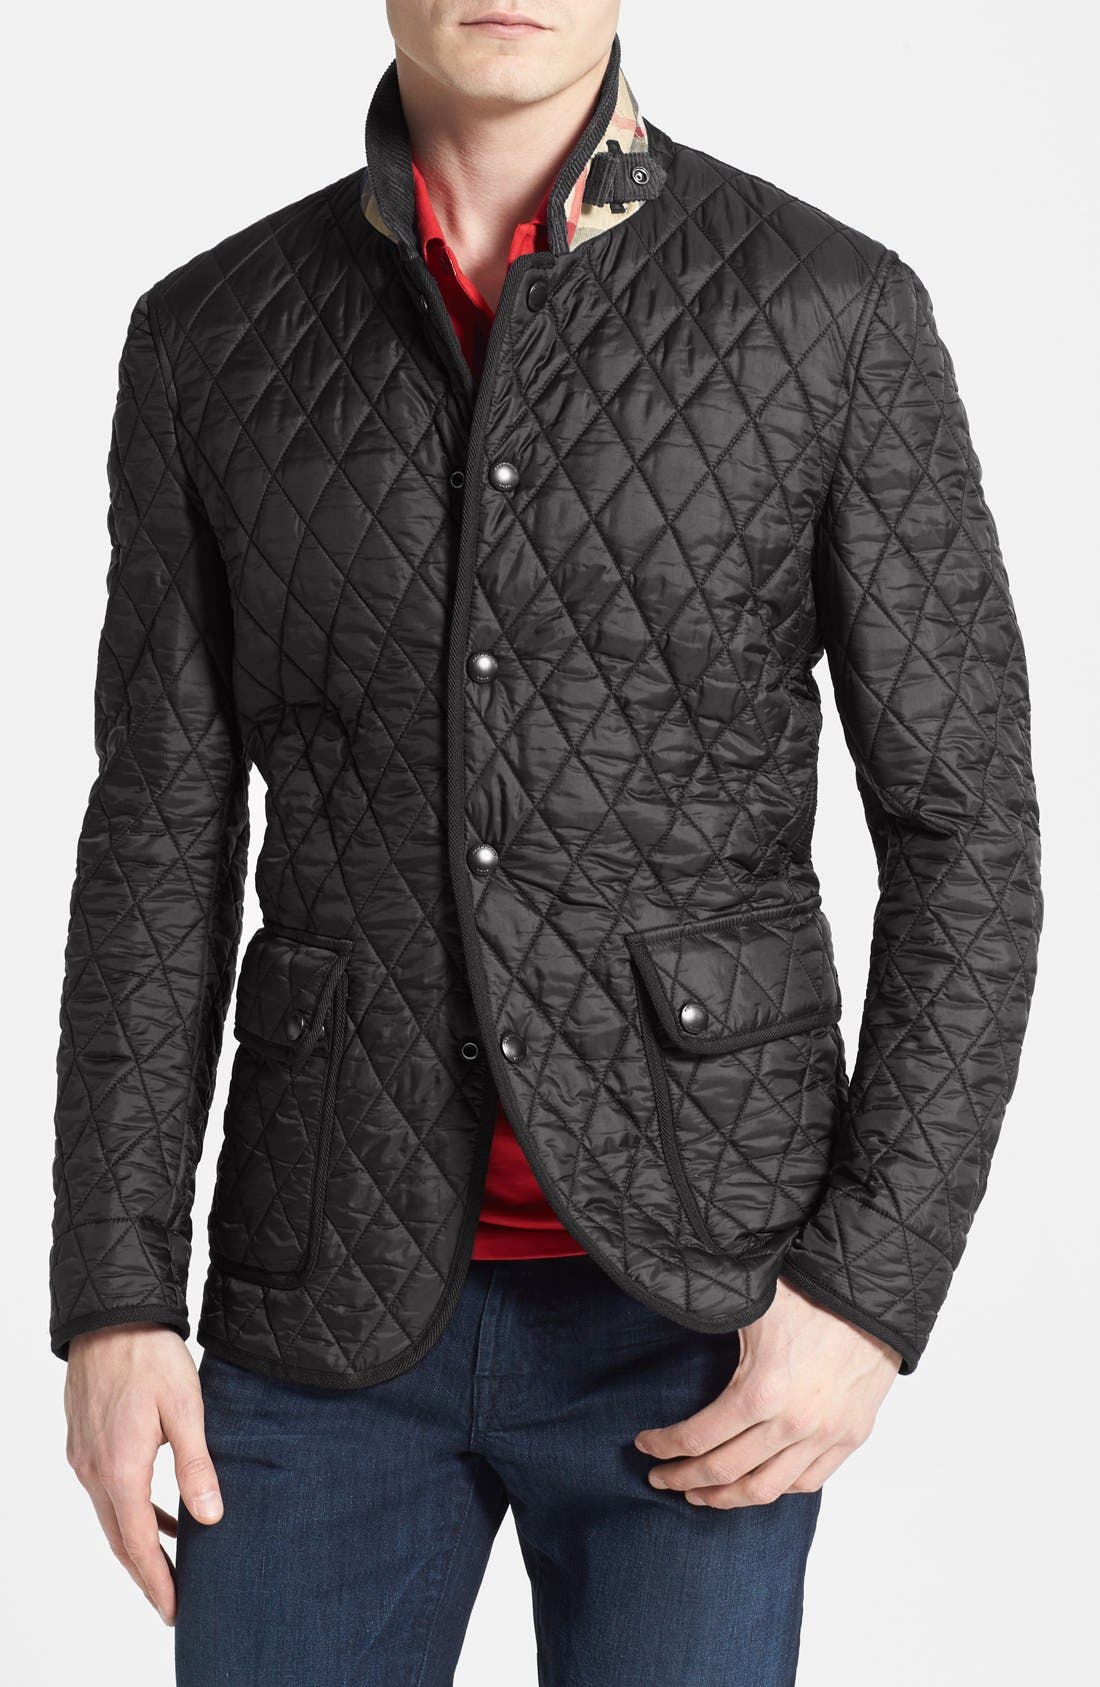 burberry quilted jacket mens sale